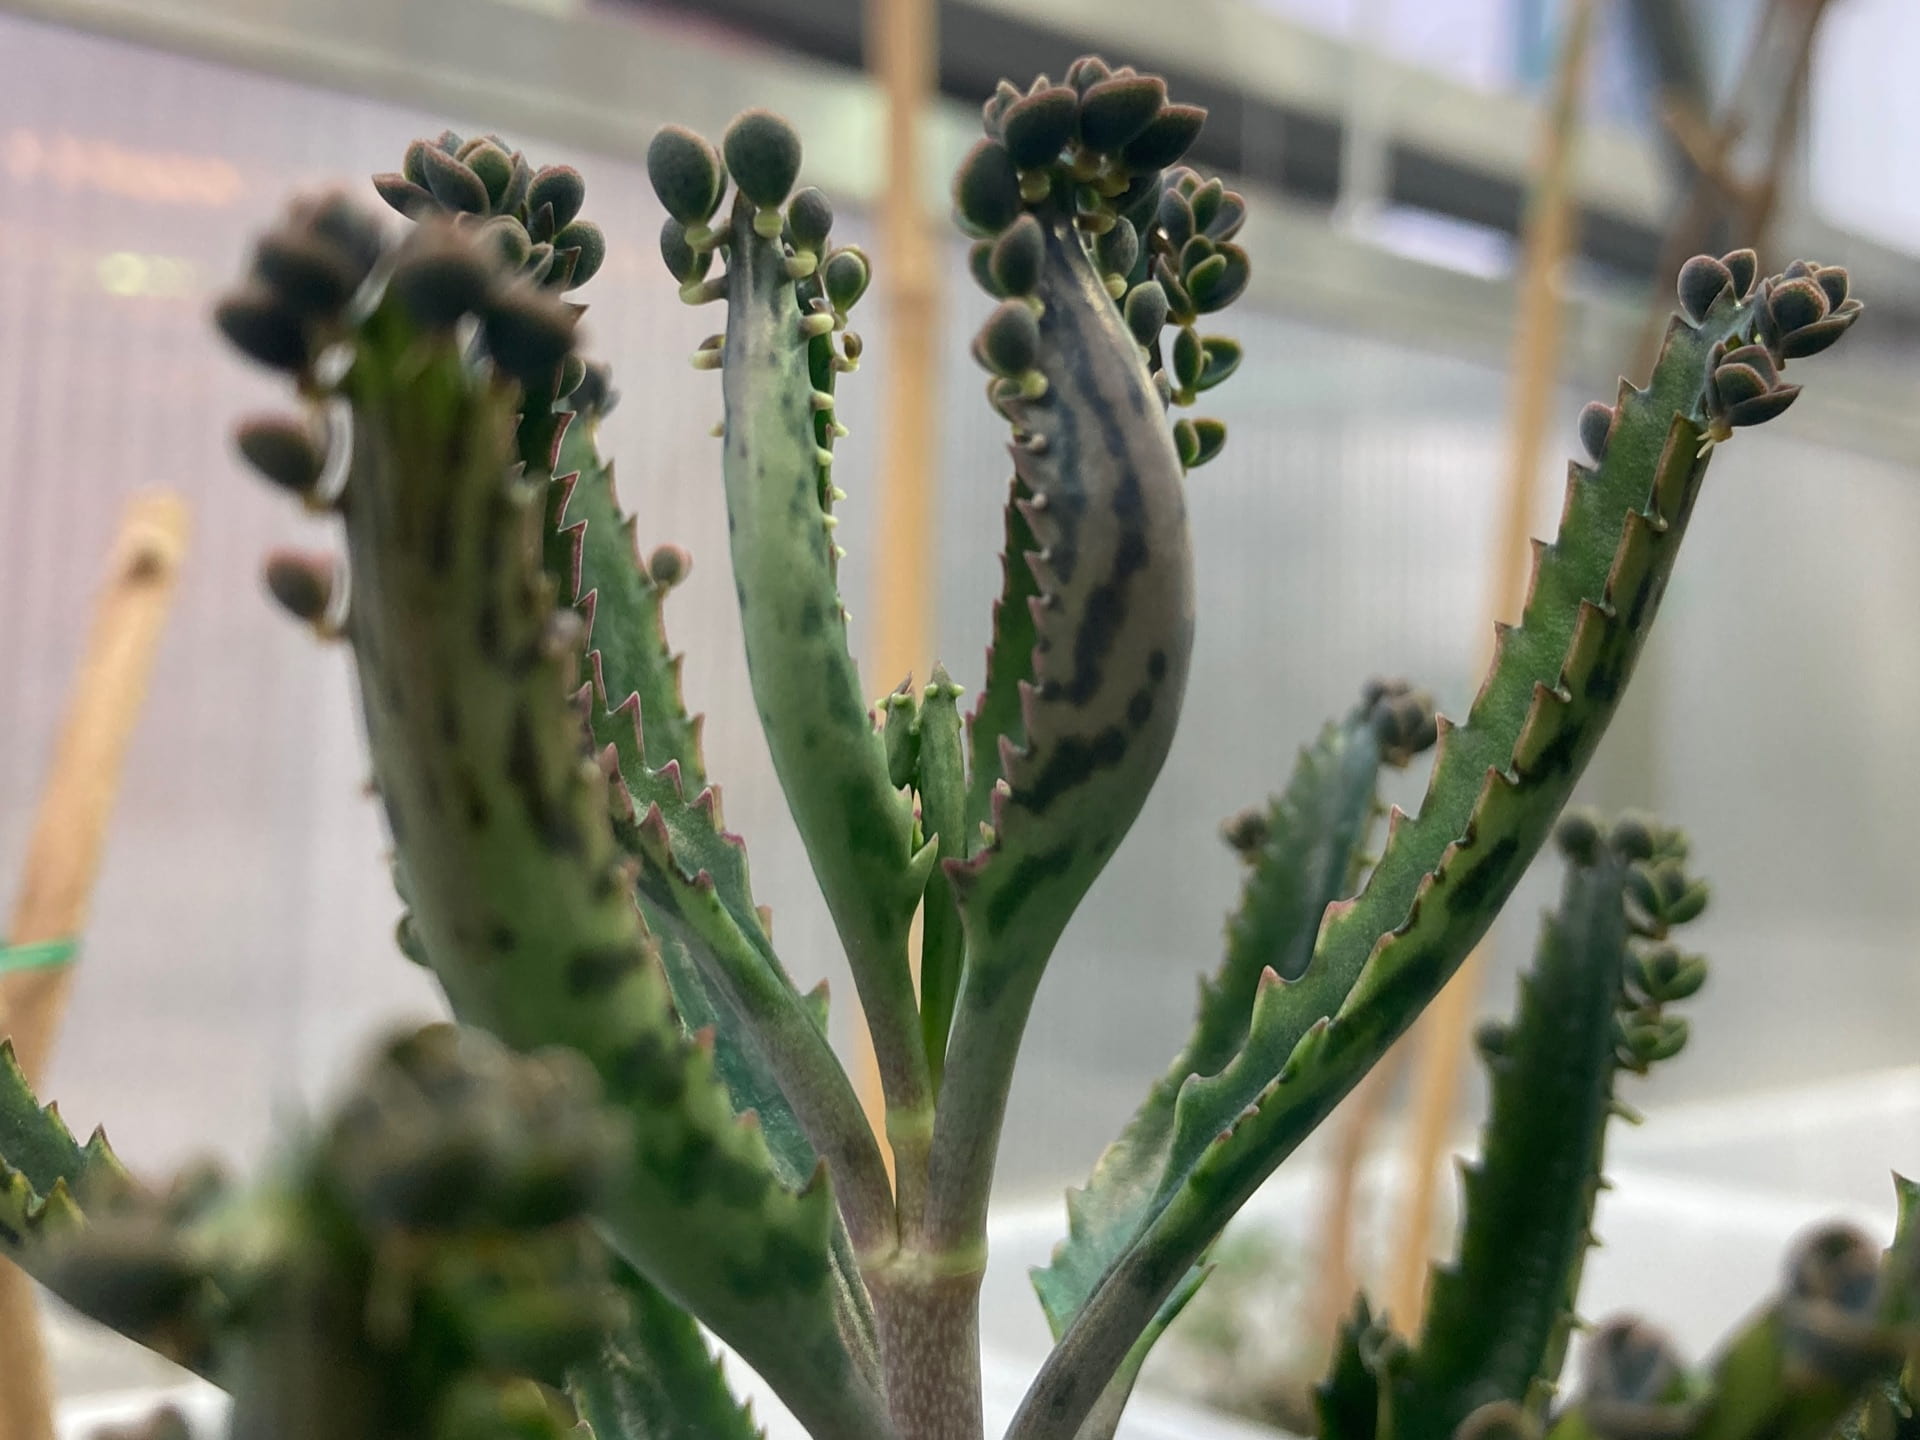 Some plants reproduce by growing plantlets, which will eventually drop off of the leaves and root into the soil beneath the parent plant. This adaption give this Kalanchoe its common name, mother of thousands.